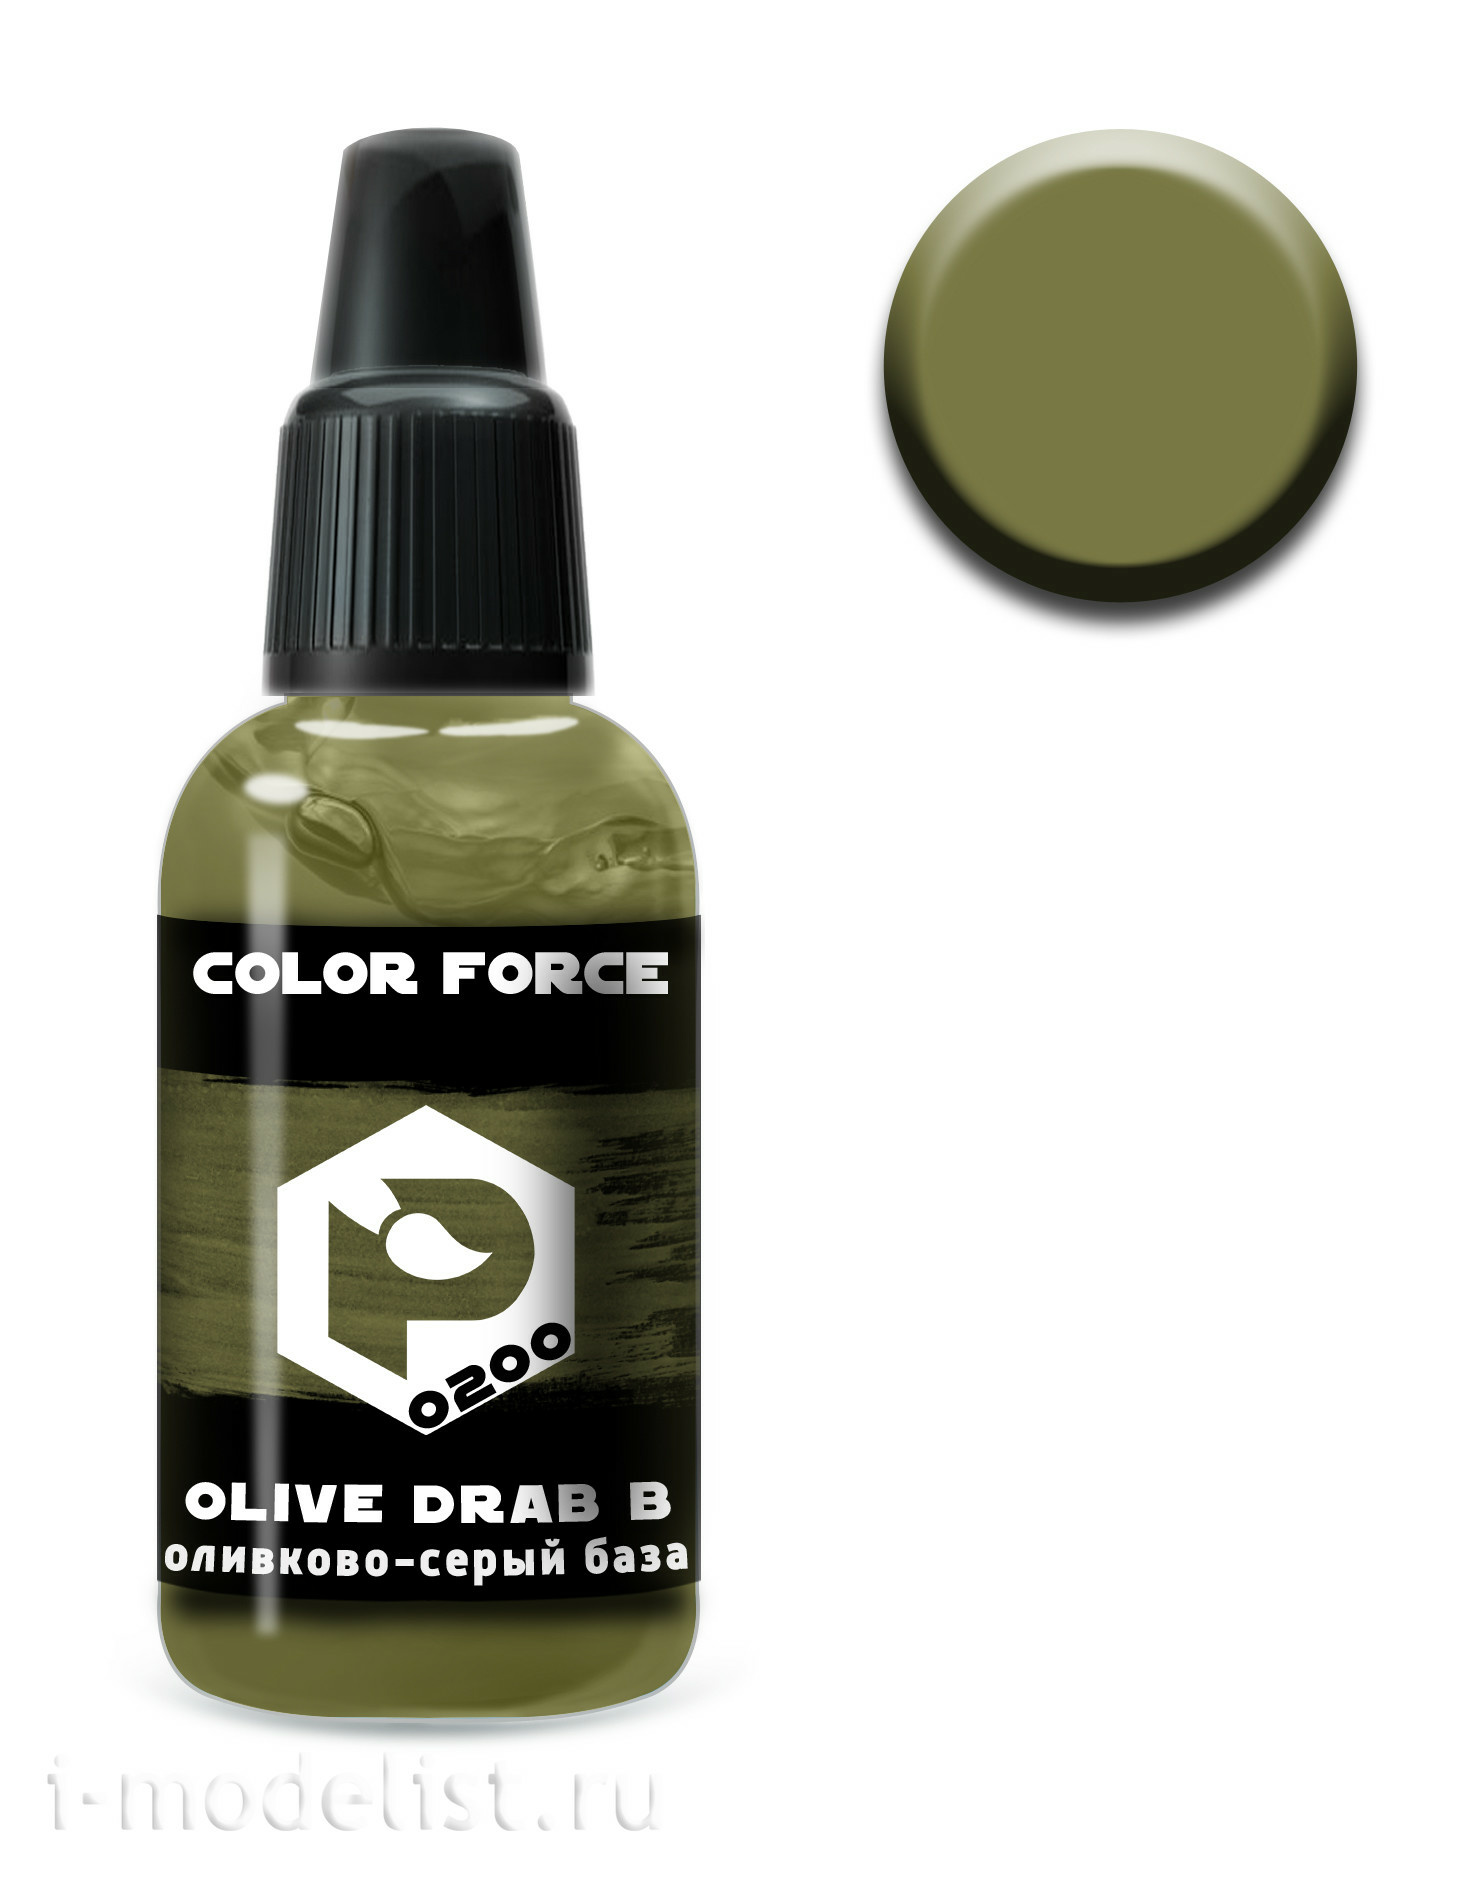 art. 0200 Pacific88 airbrush Paint Olive-gray base (Olive drab base)